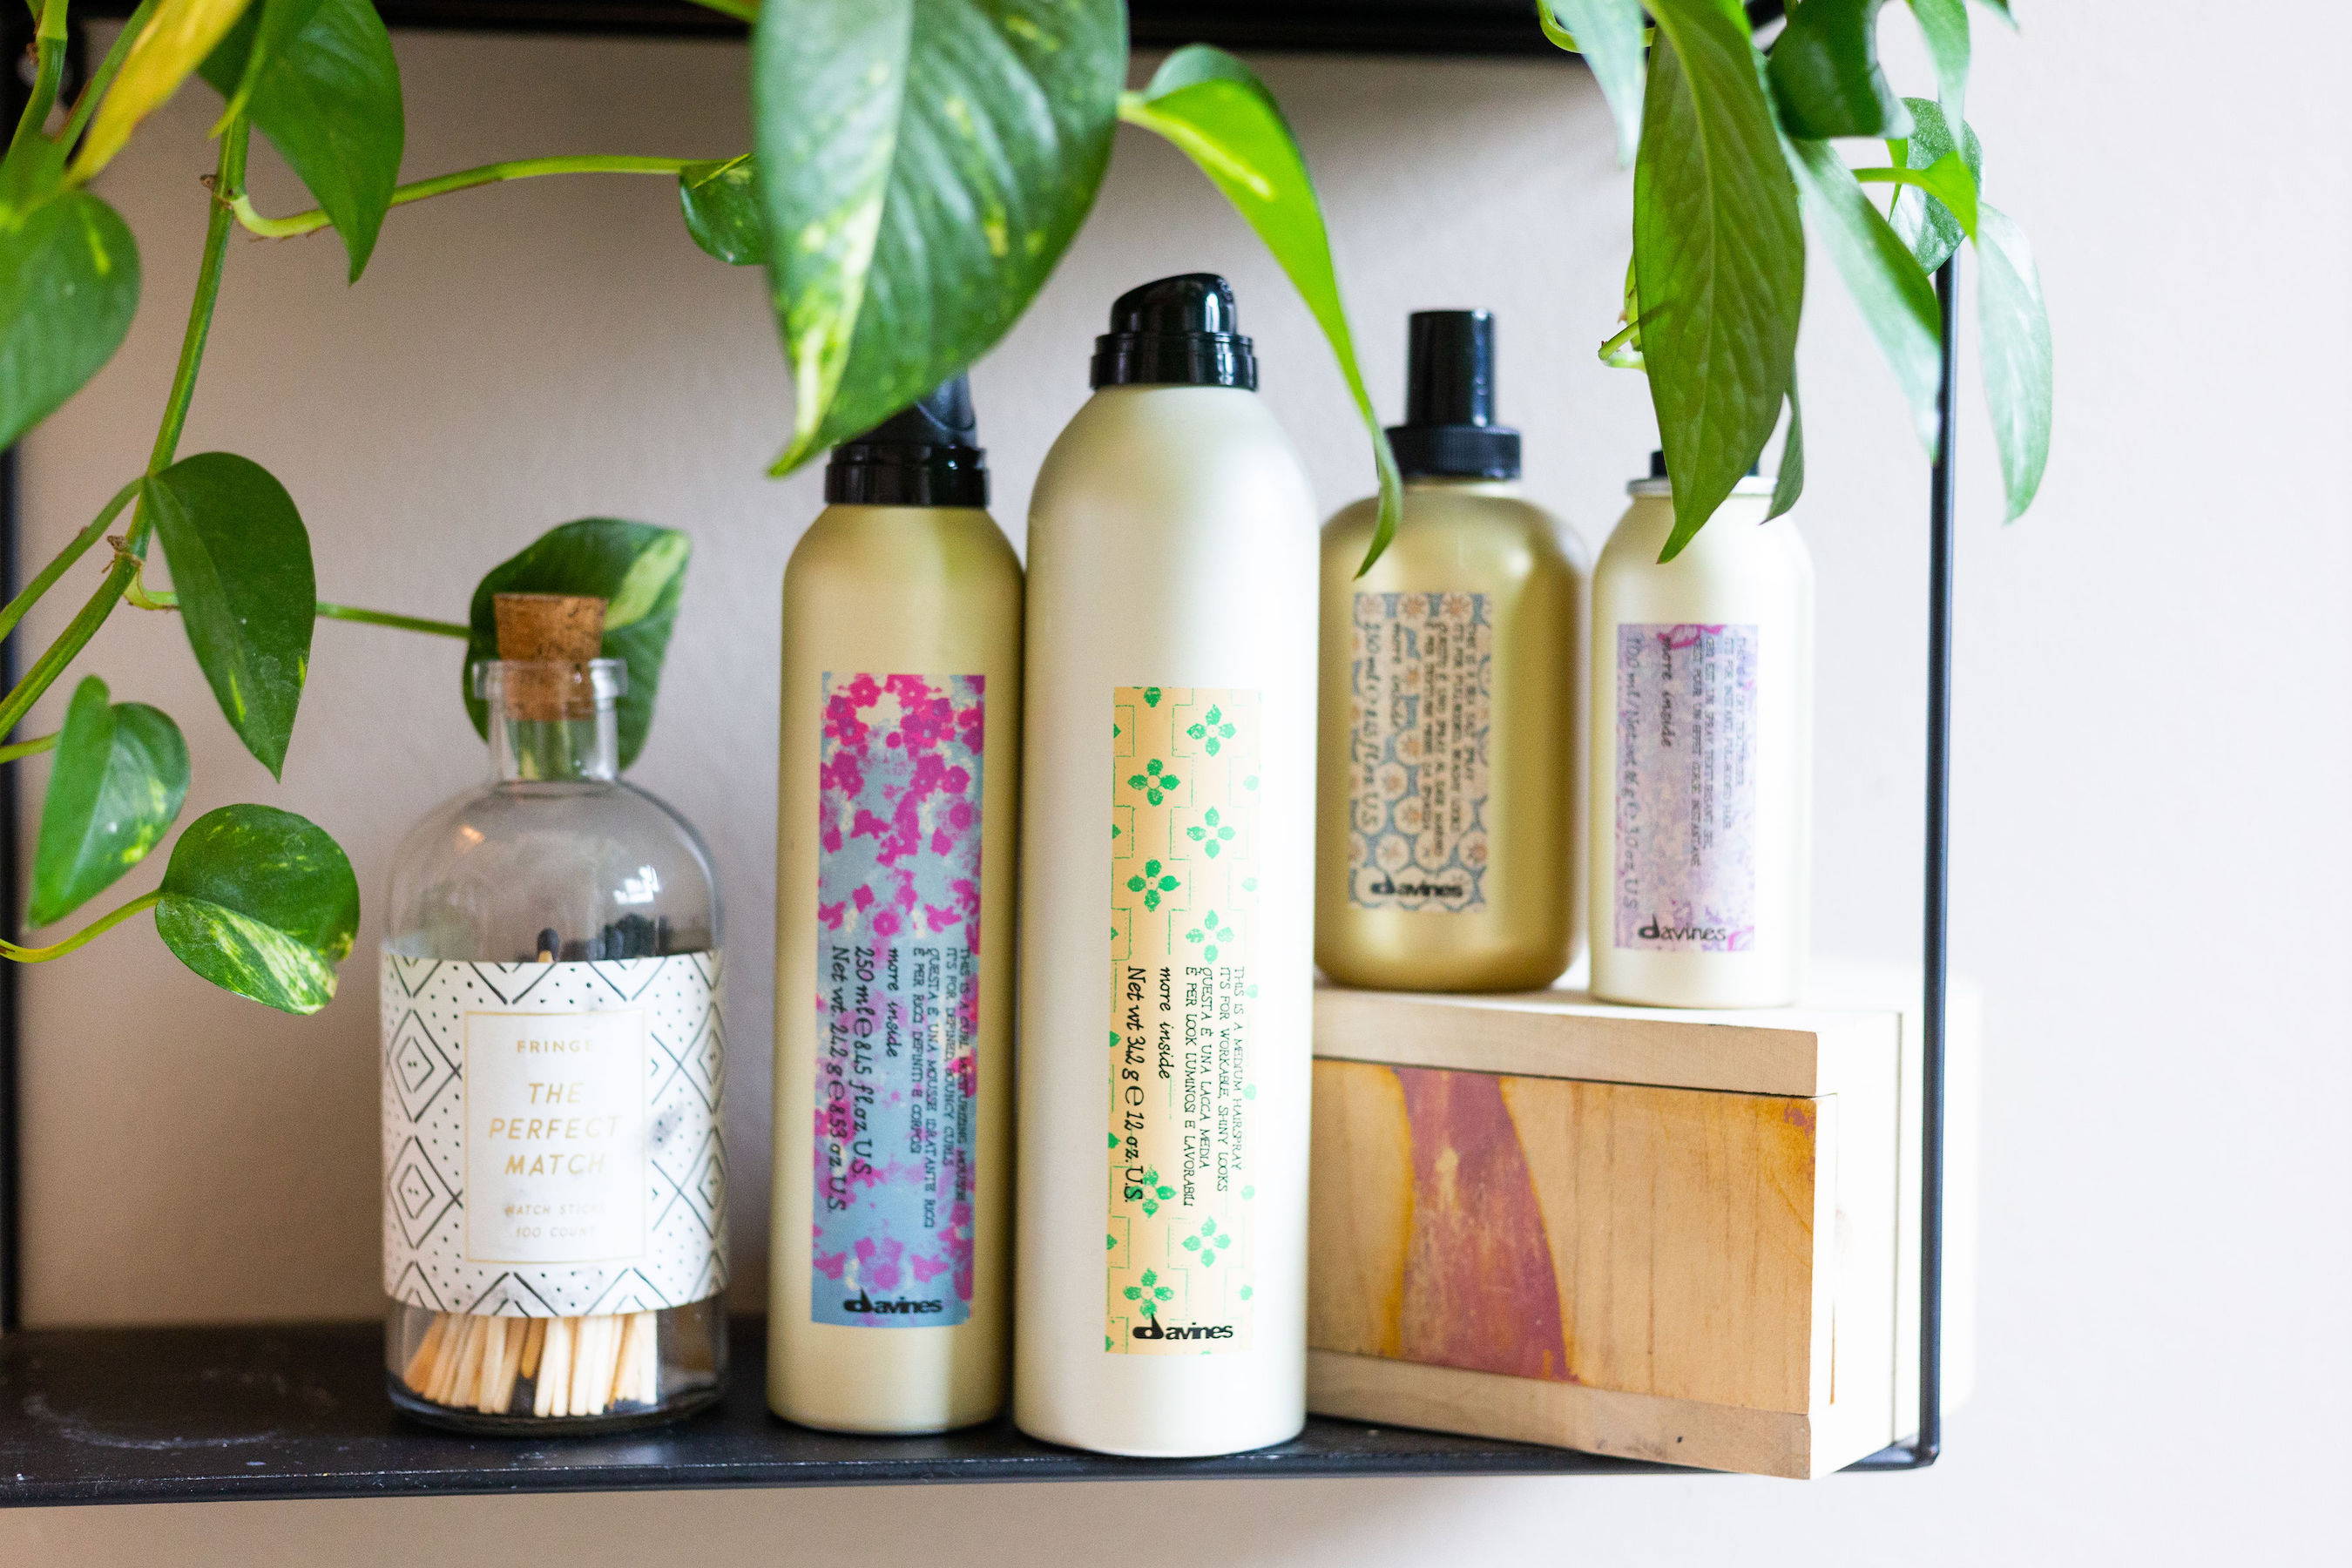 Davines styling products